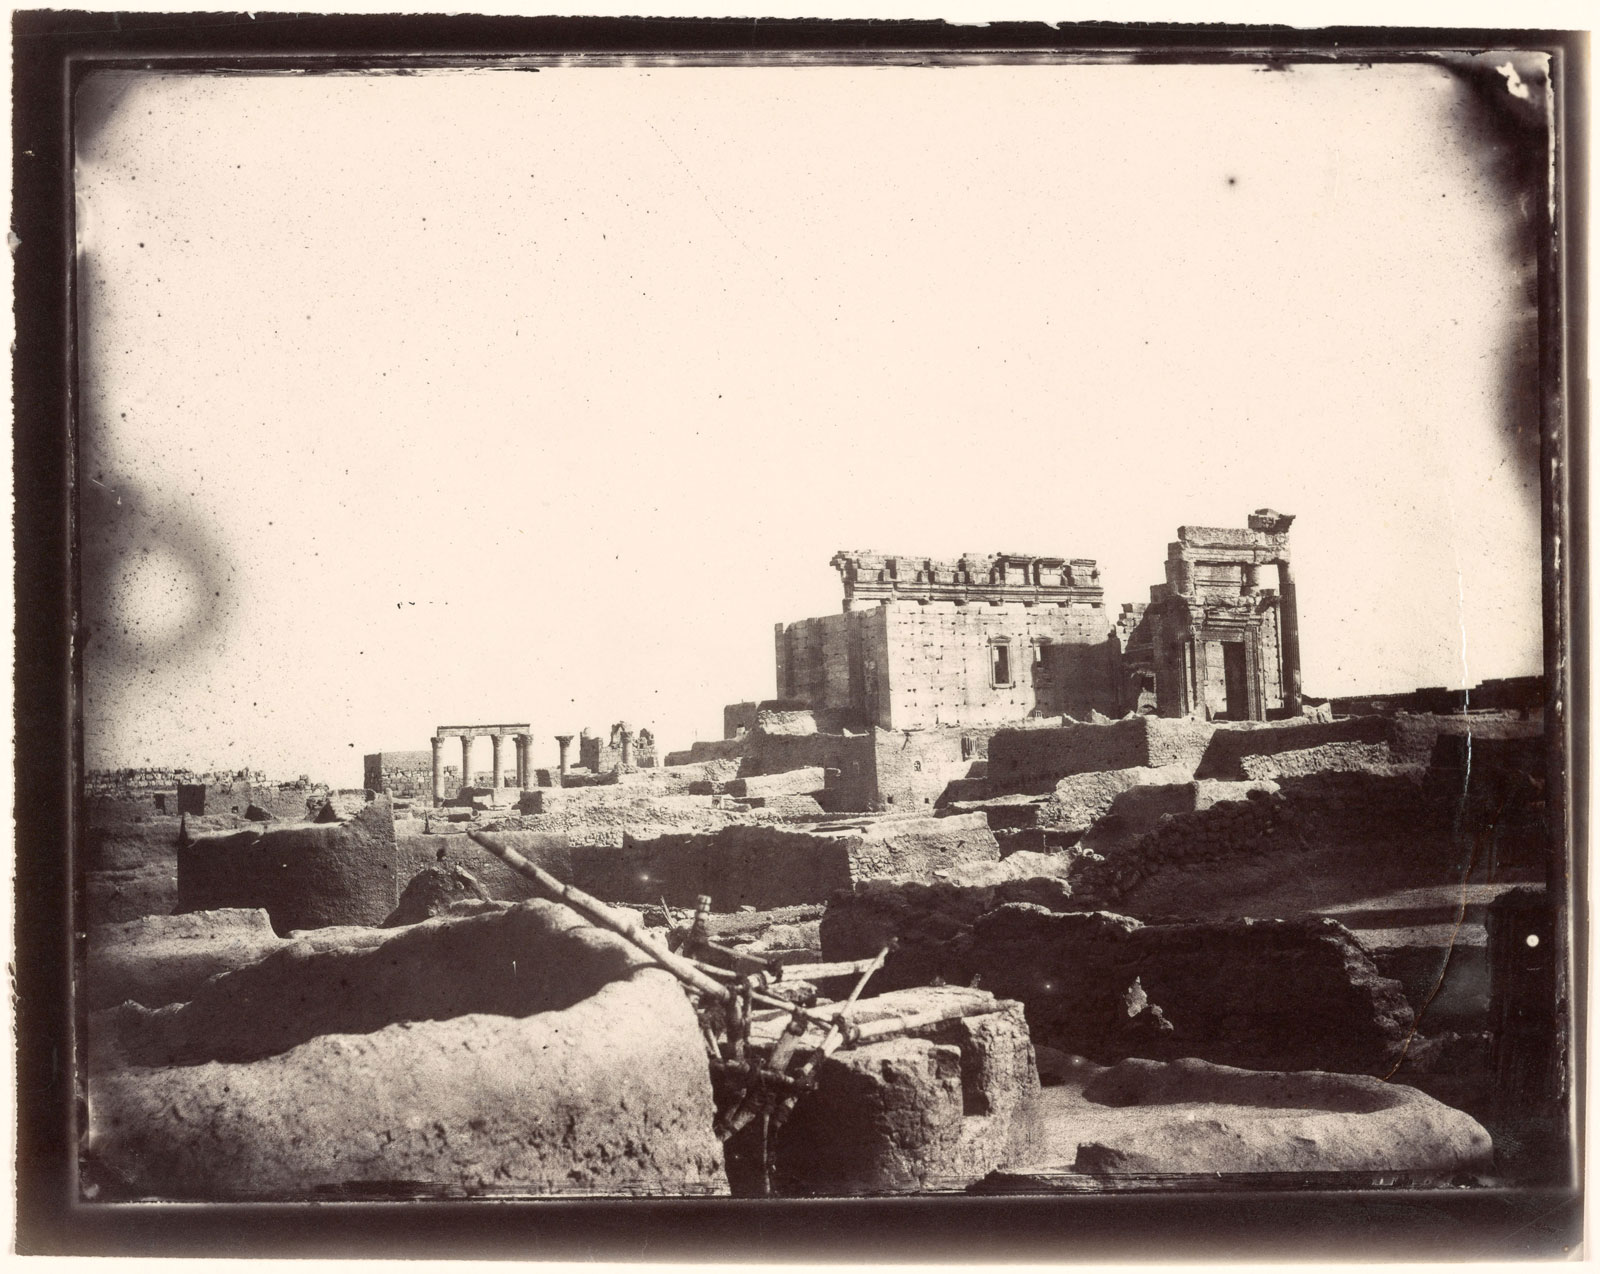 View of the Temple of Bel from the Northwest Corner of the Courtyard 